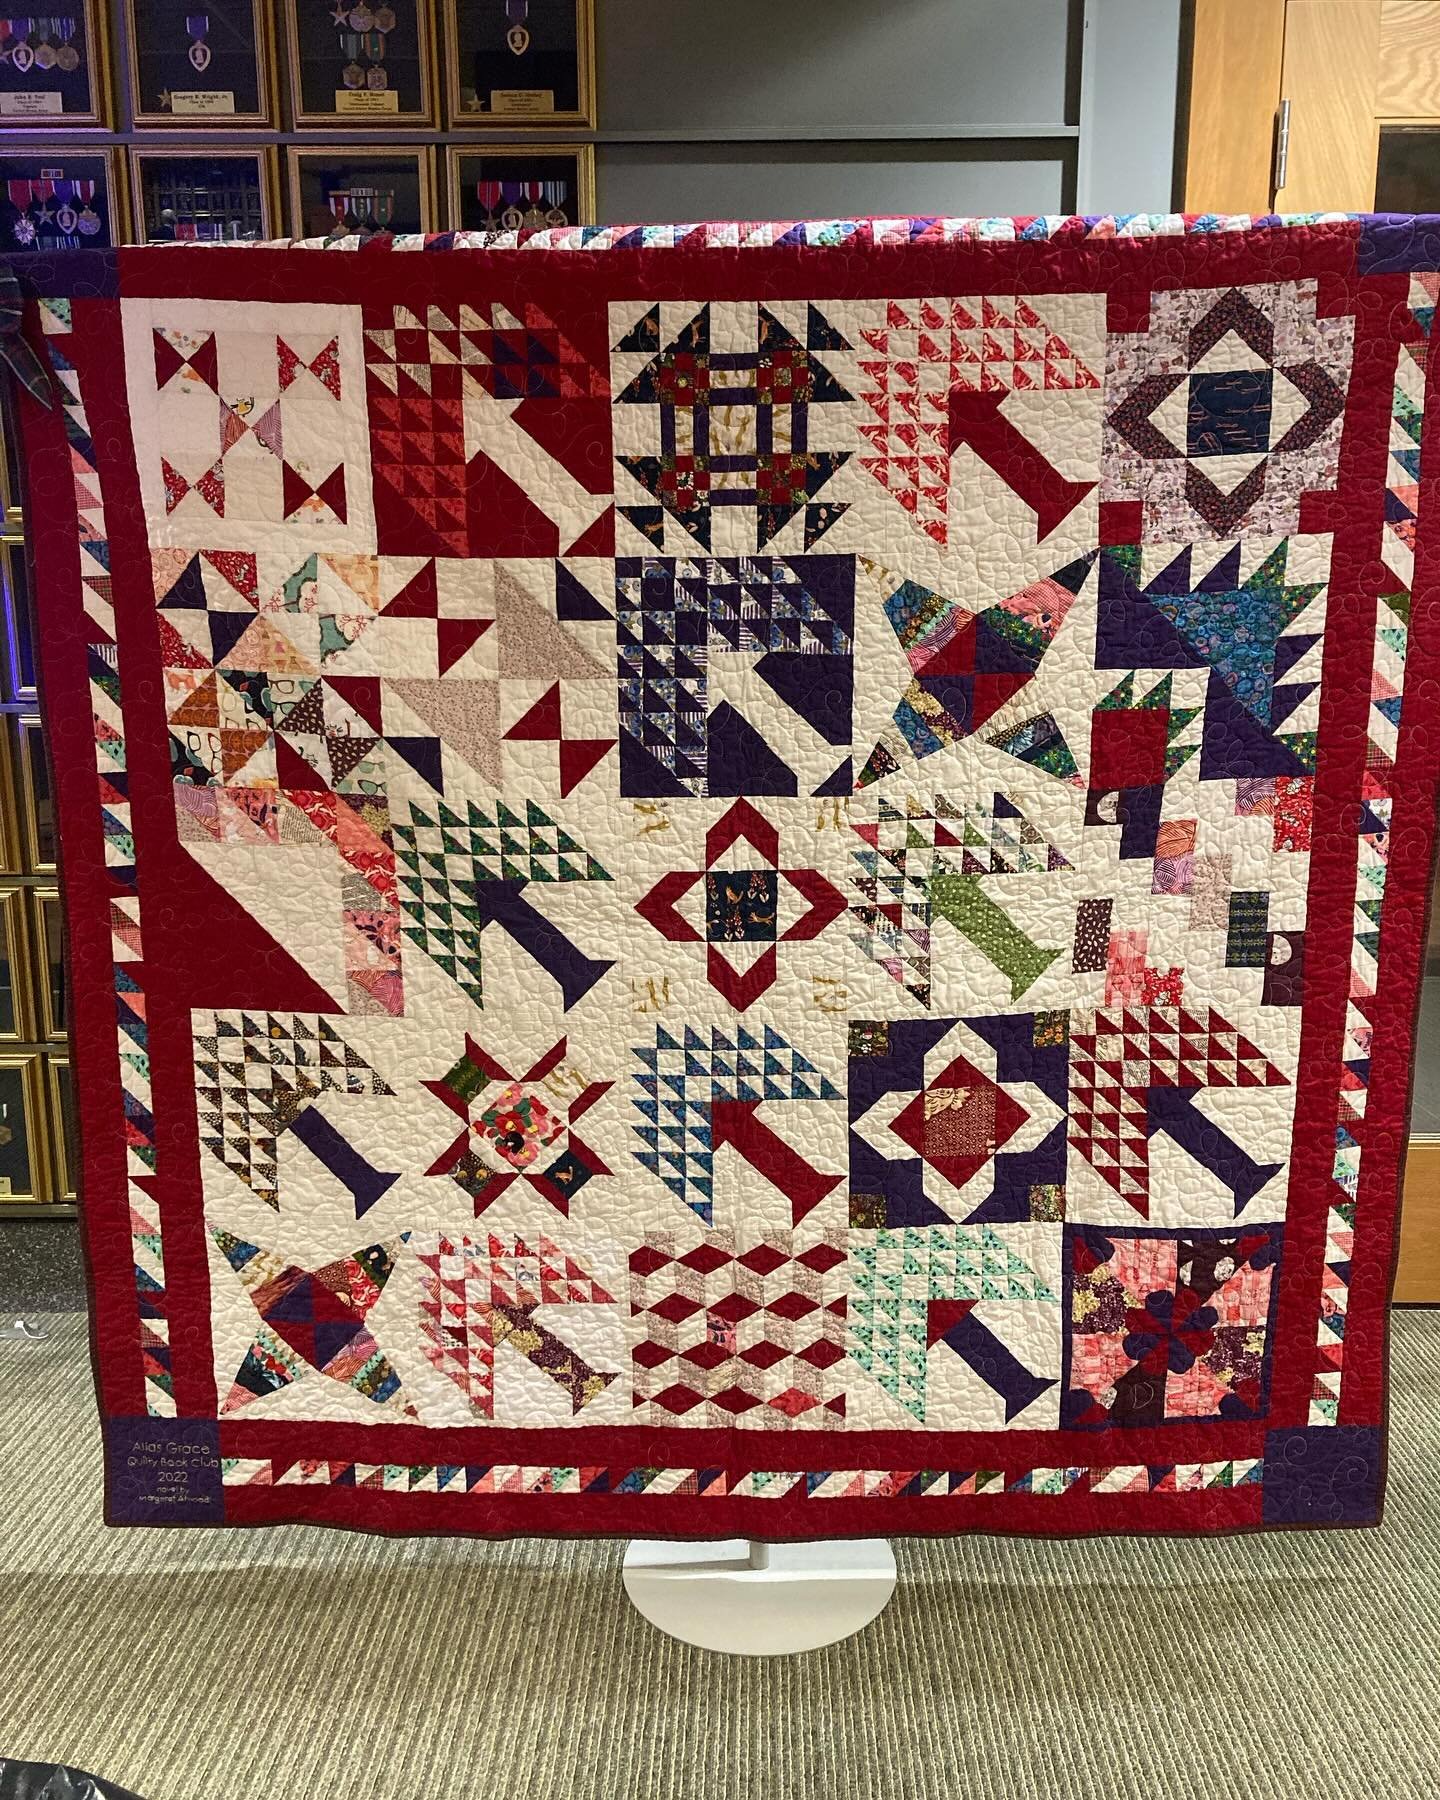 This quilt, made by @accaciamax @amanda.davenport83 @domi_culta and @nammiejoan is up for auction and you can bid. Check the story for the link. Closes soon!